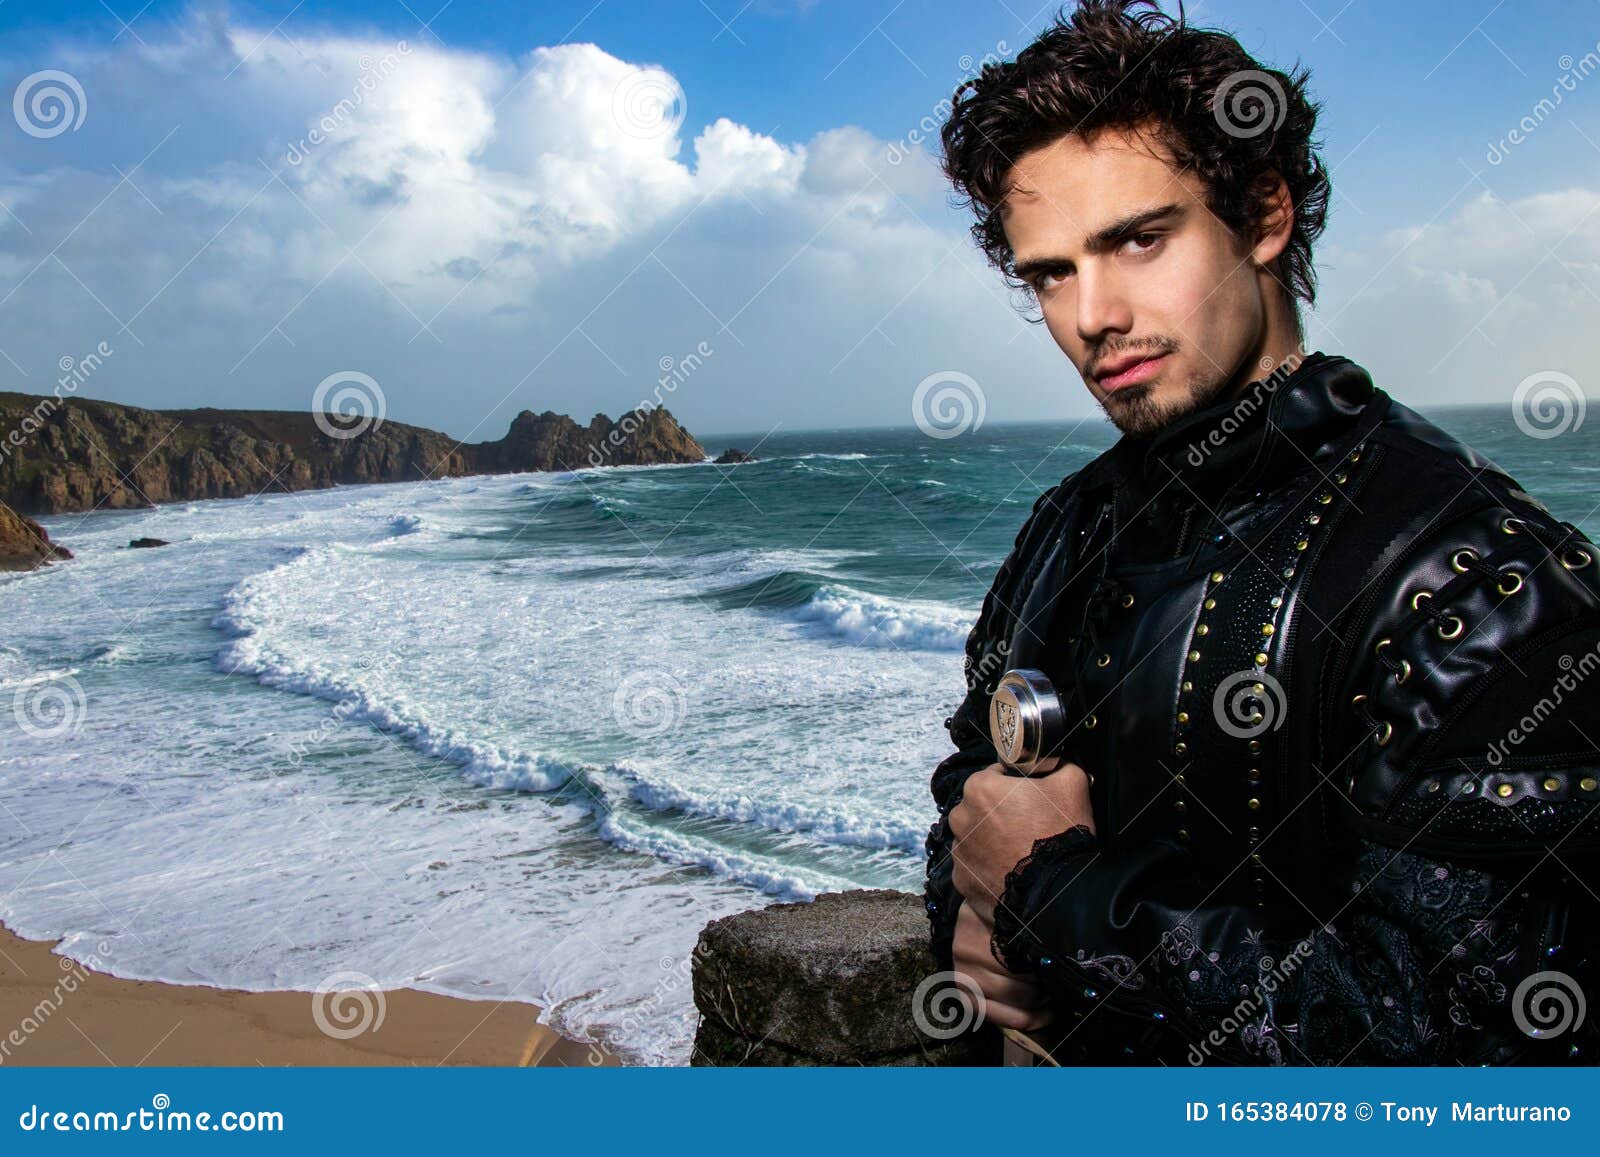 Bright Portrait of Handsome Knight Standing on Castle Balcony with ...